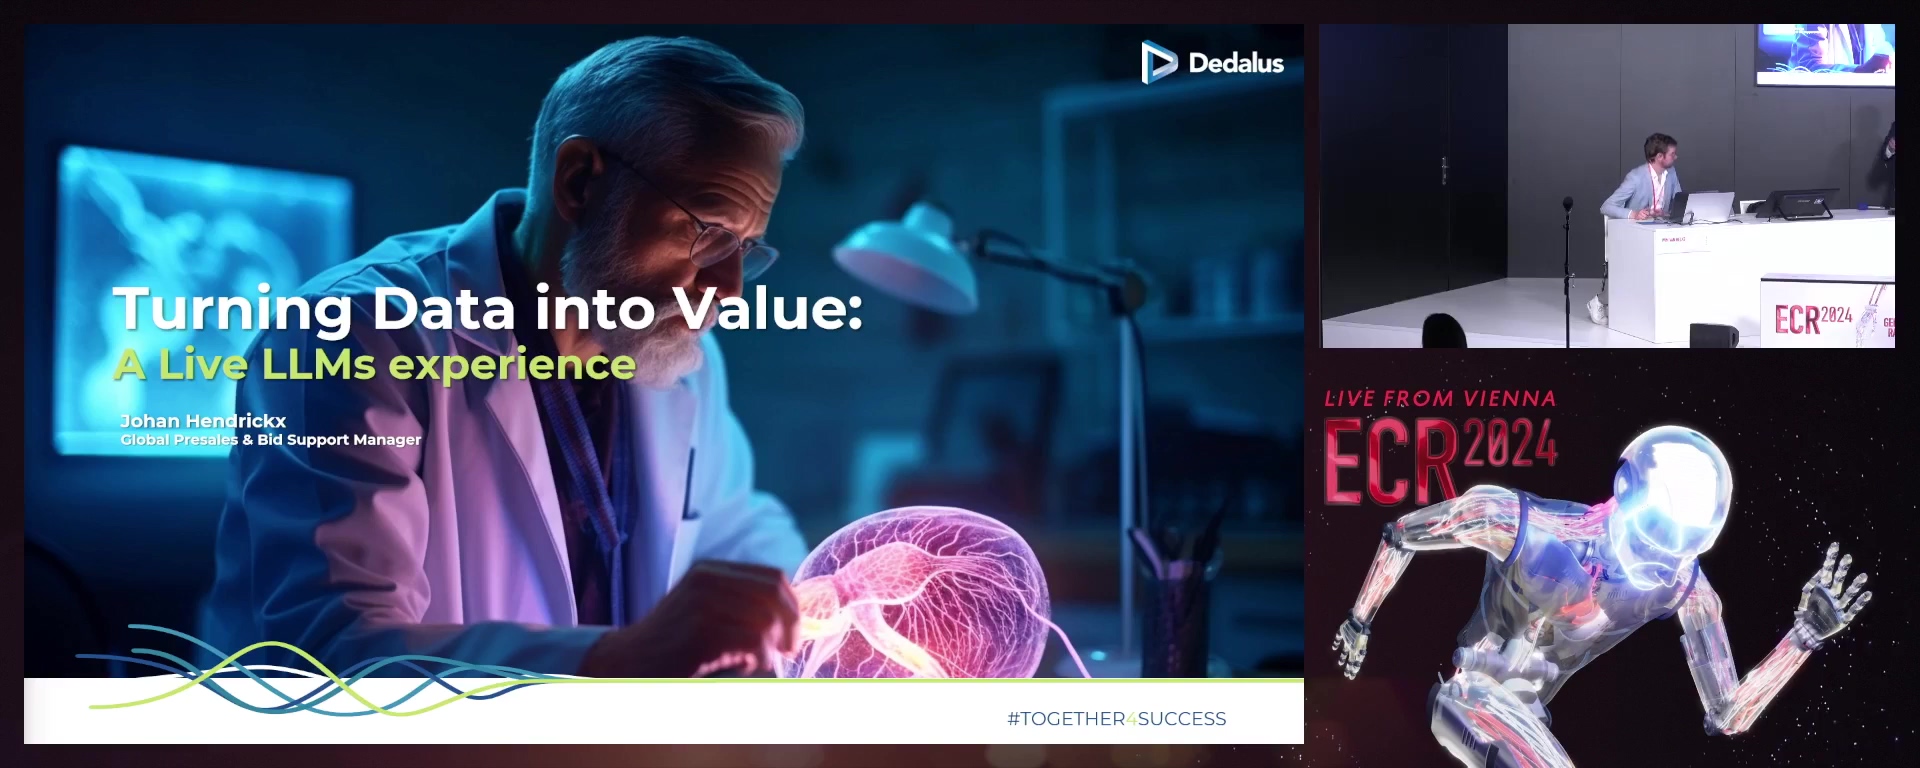 Turning Data into Value:​ A Live LLMs experience for radiology efficiency​